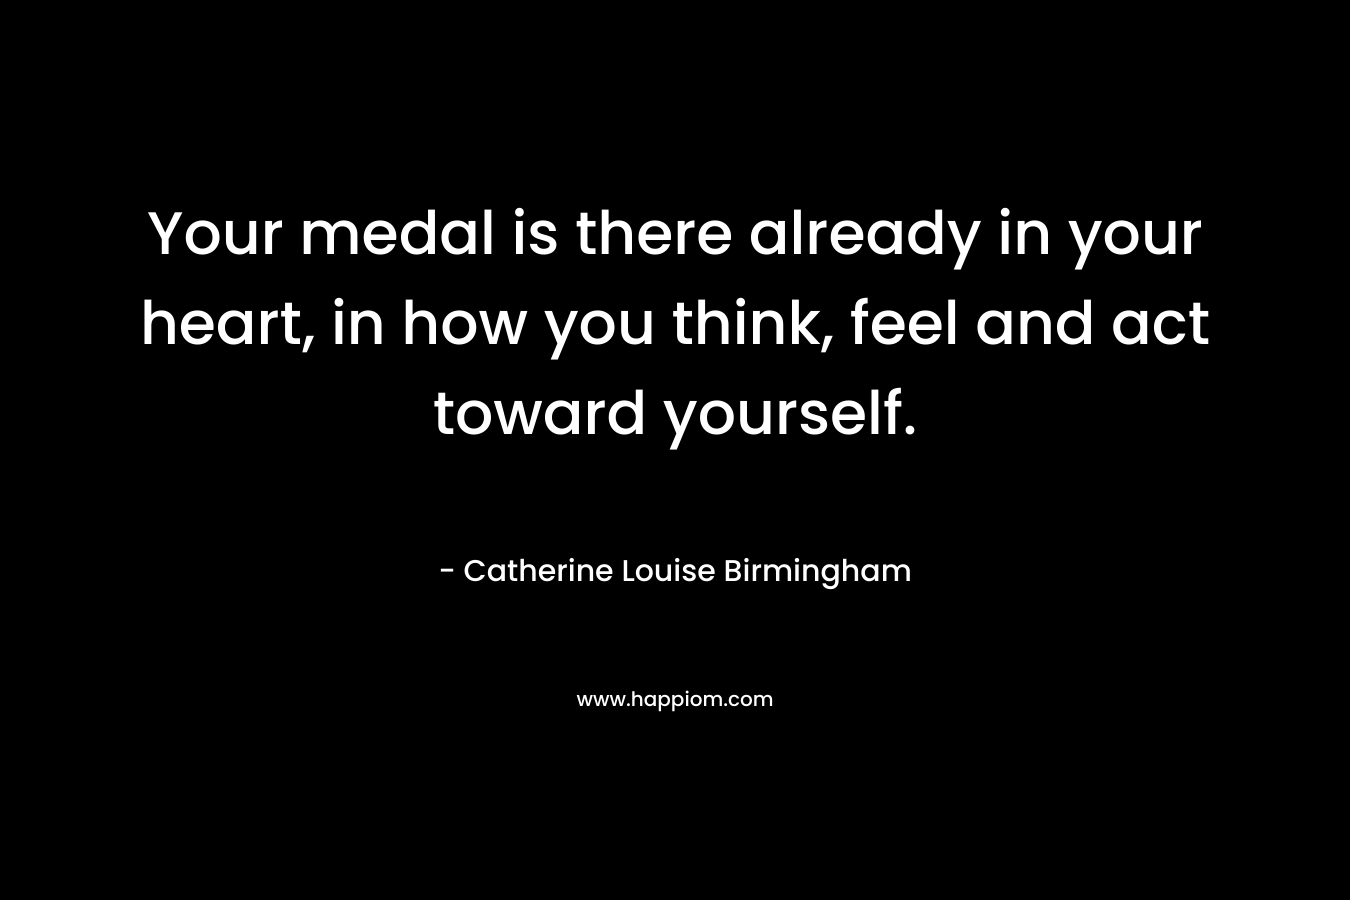 Your medal is there already in your heart, in how you think, feel and act toward yourself. – Catherine Louise Birmingham